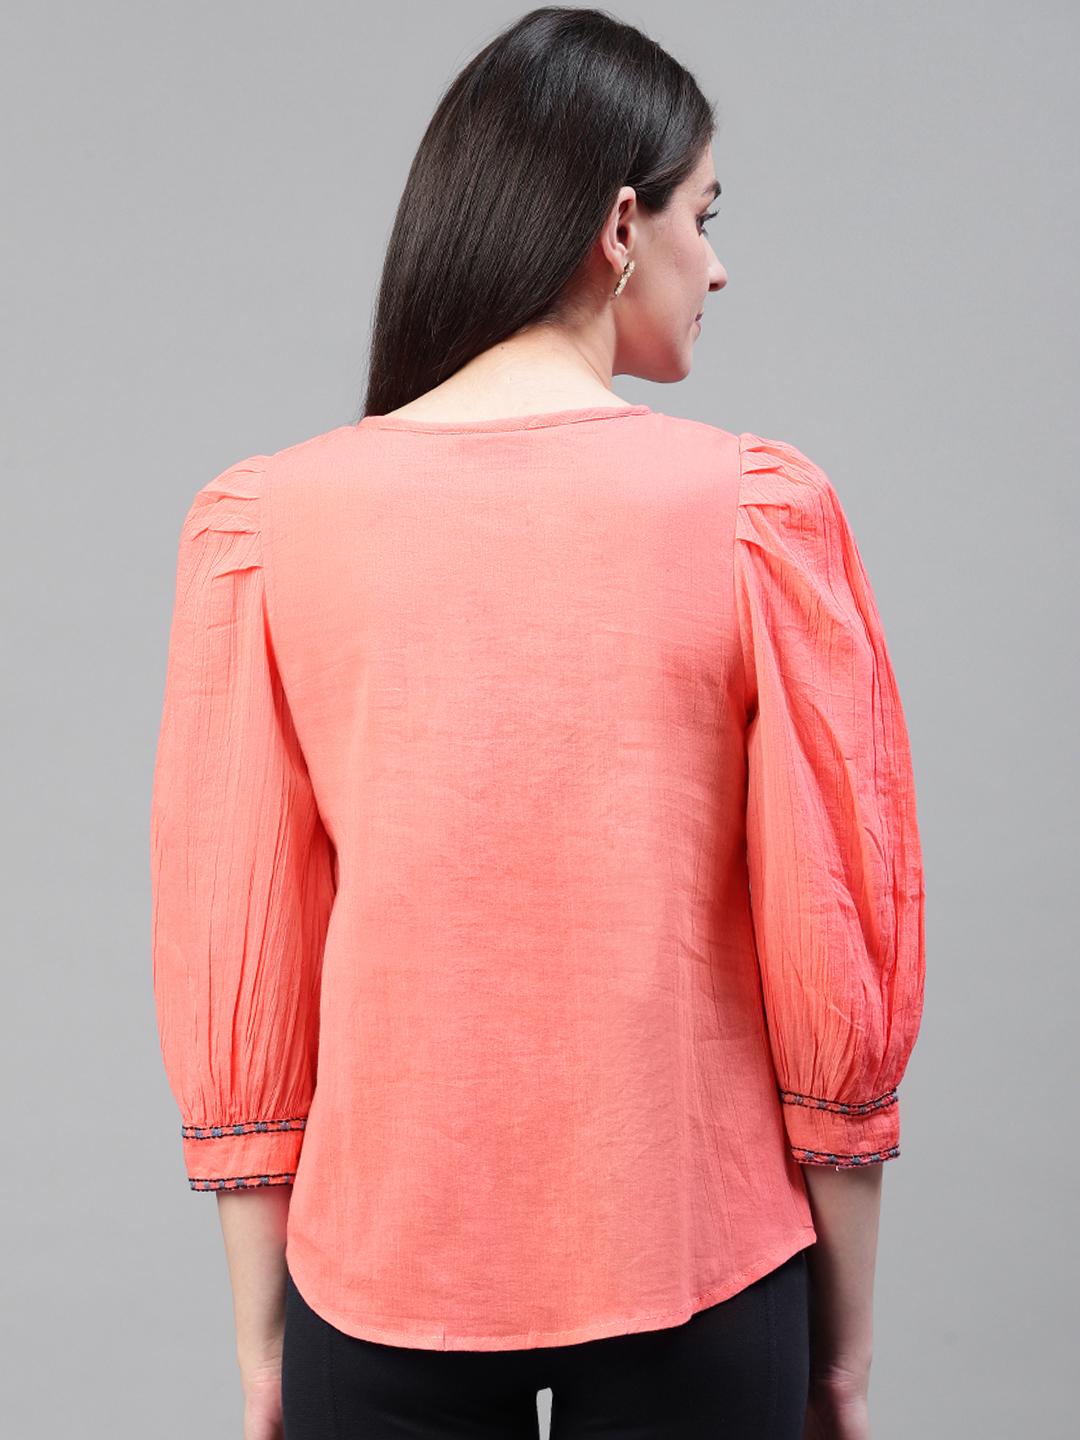 Pink Yoke Embroidered Top